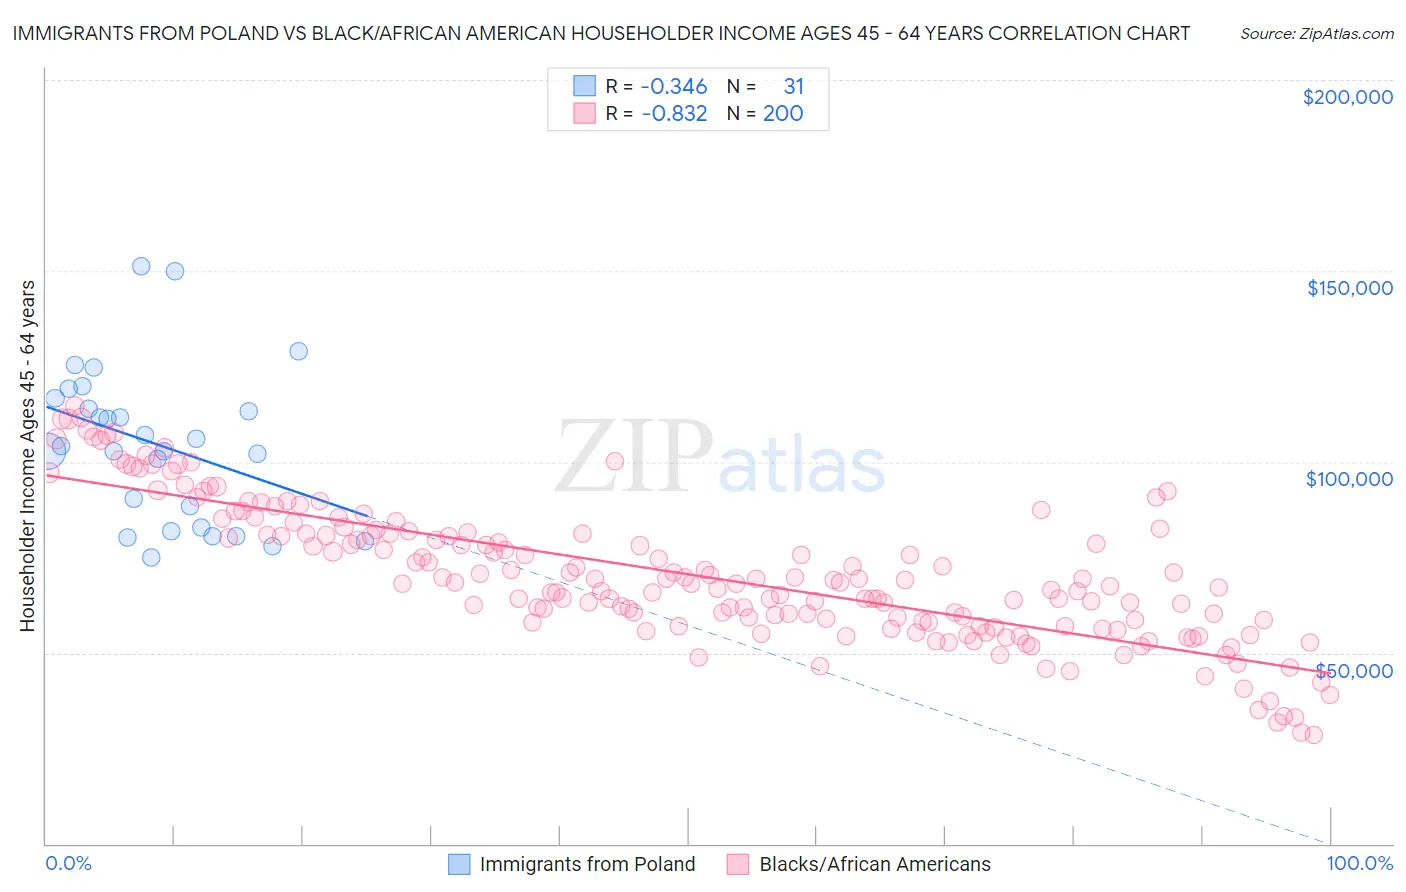 Immigrants from Poland vs Black/African American Householder Income Ages 45 - 64 years